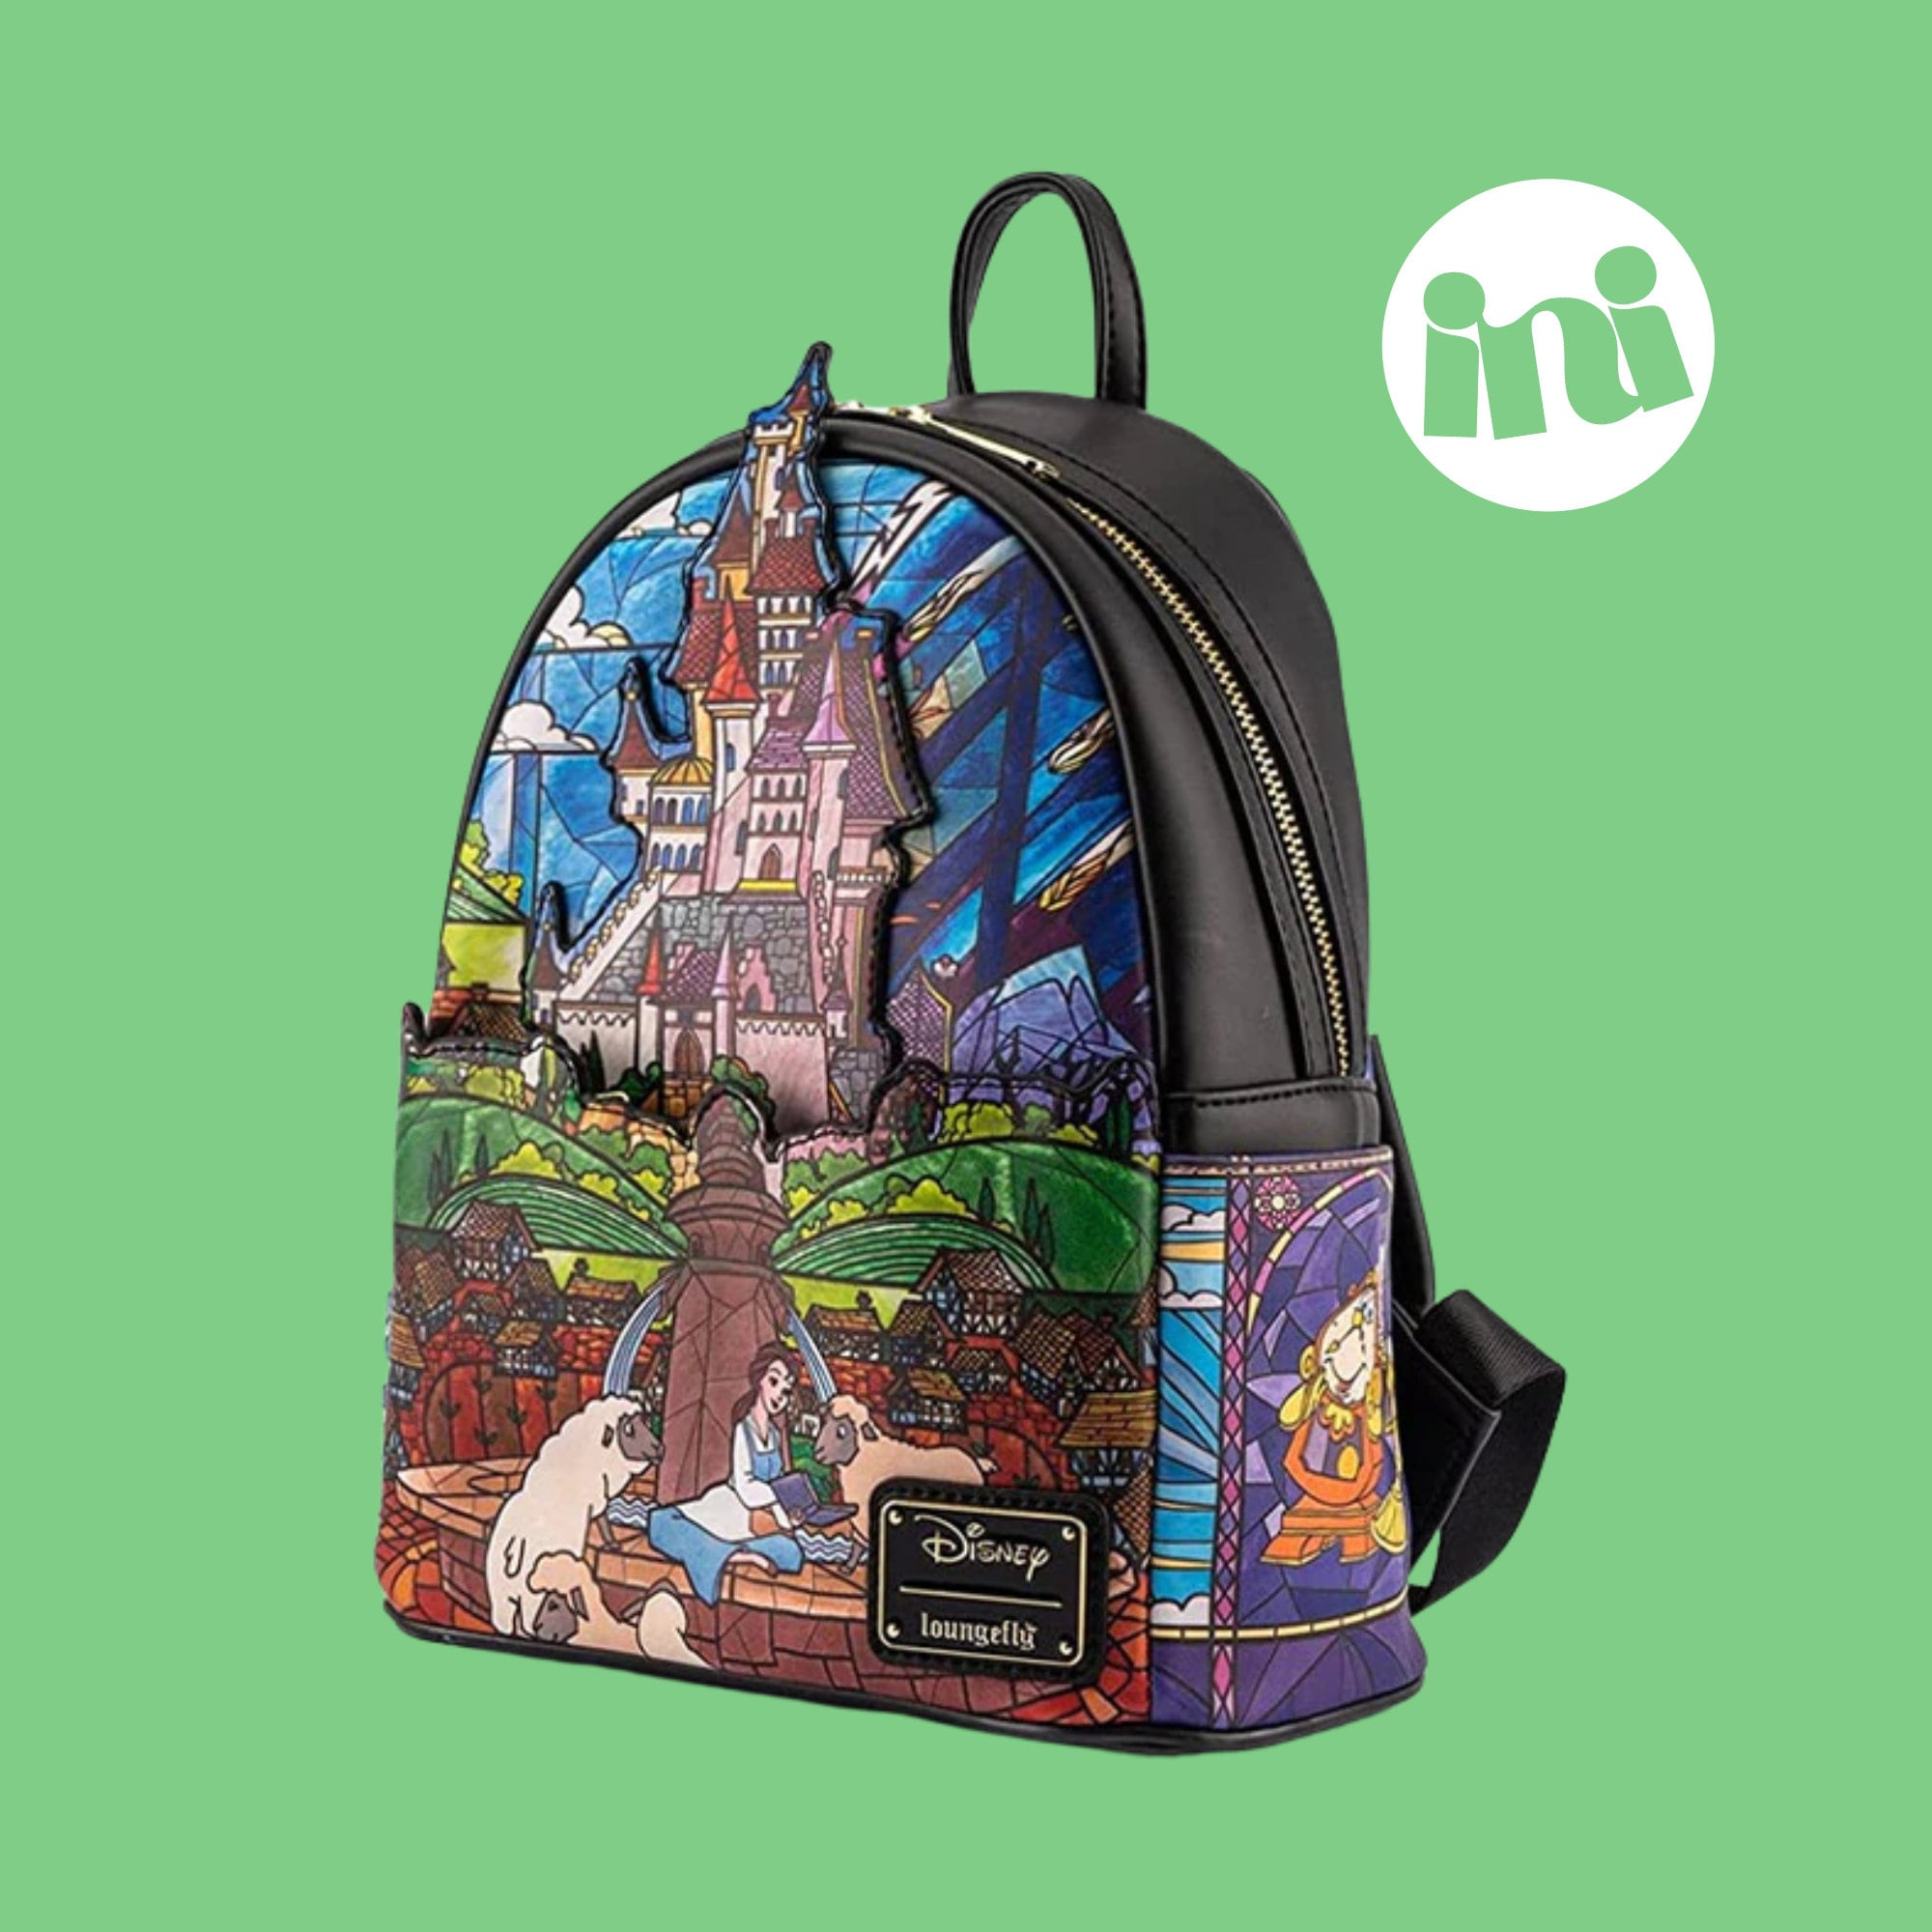 Disney Beauty and the Beast School Bags Teenager USB Charging Laptop  Backpack For Boys Girls Student Book Bag Mochila Travel Bag